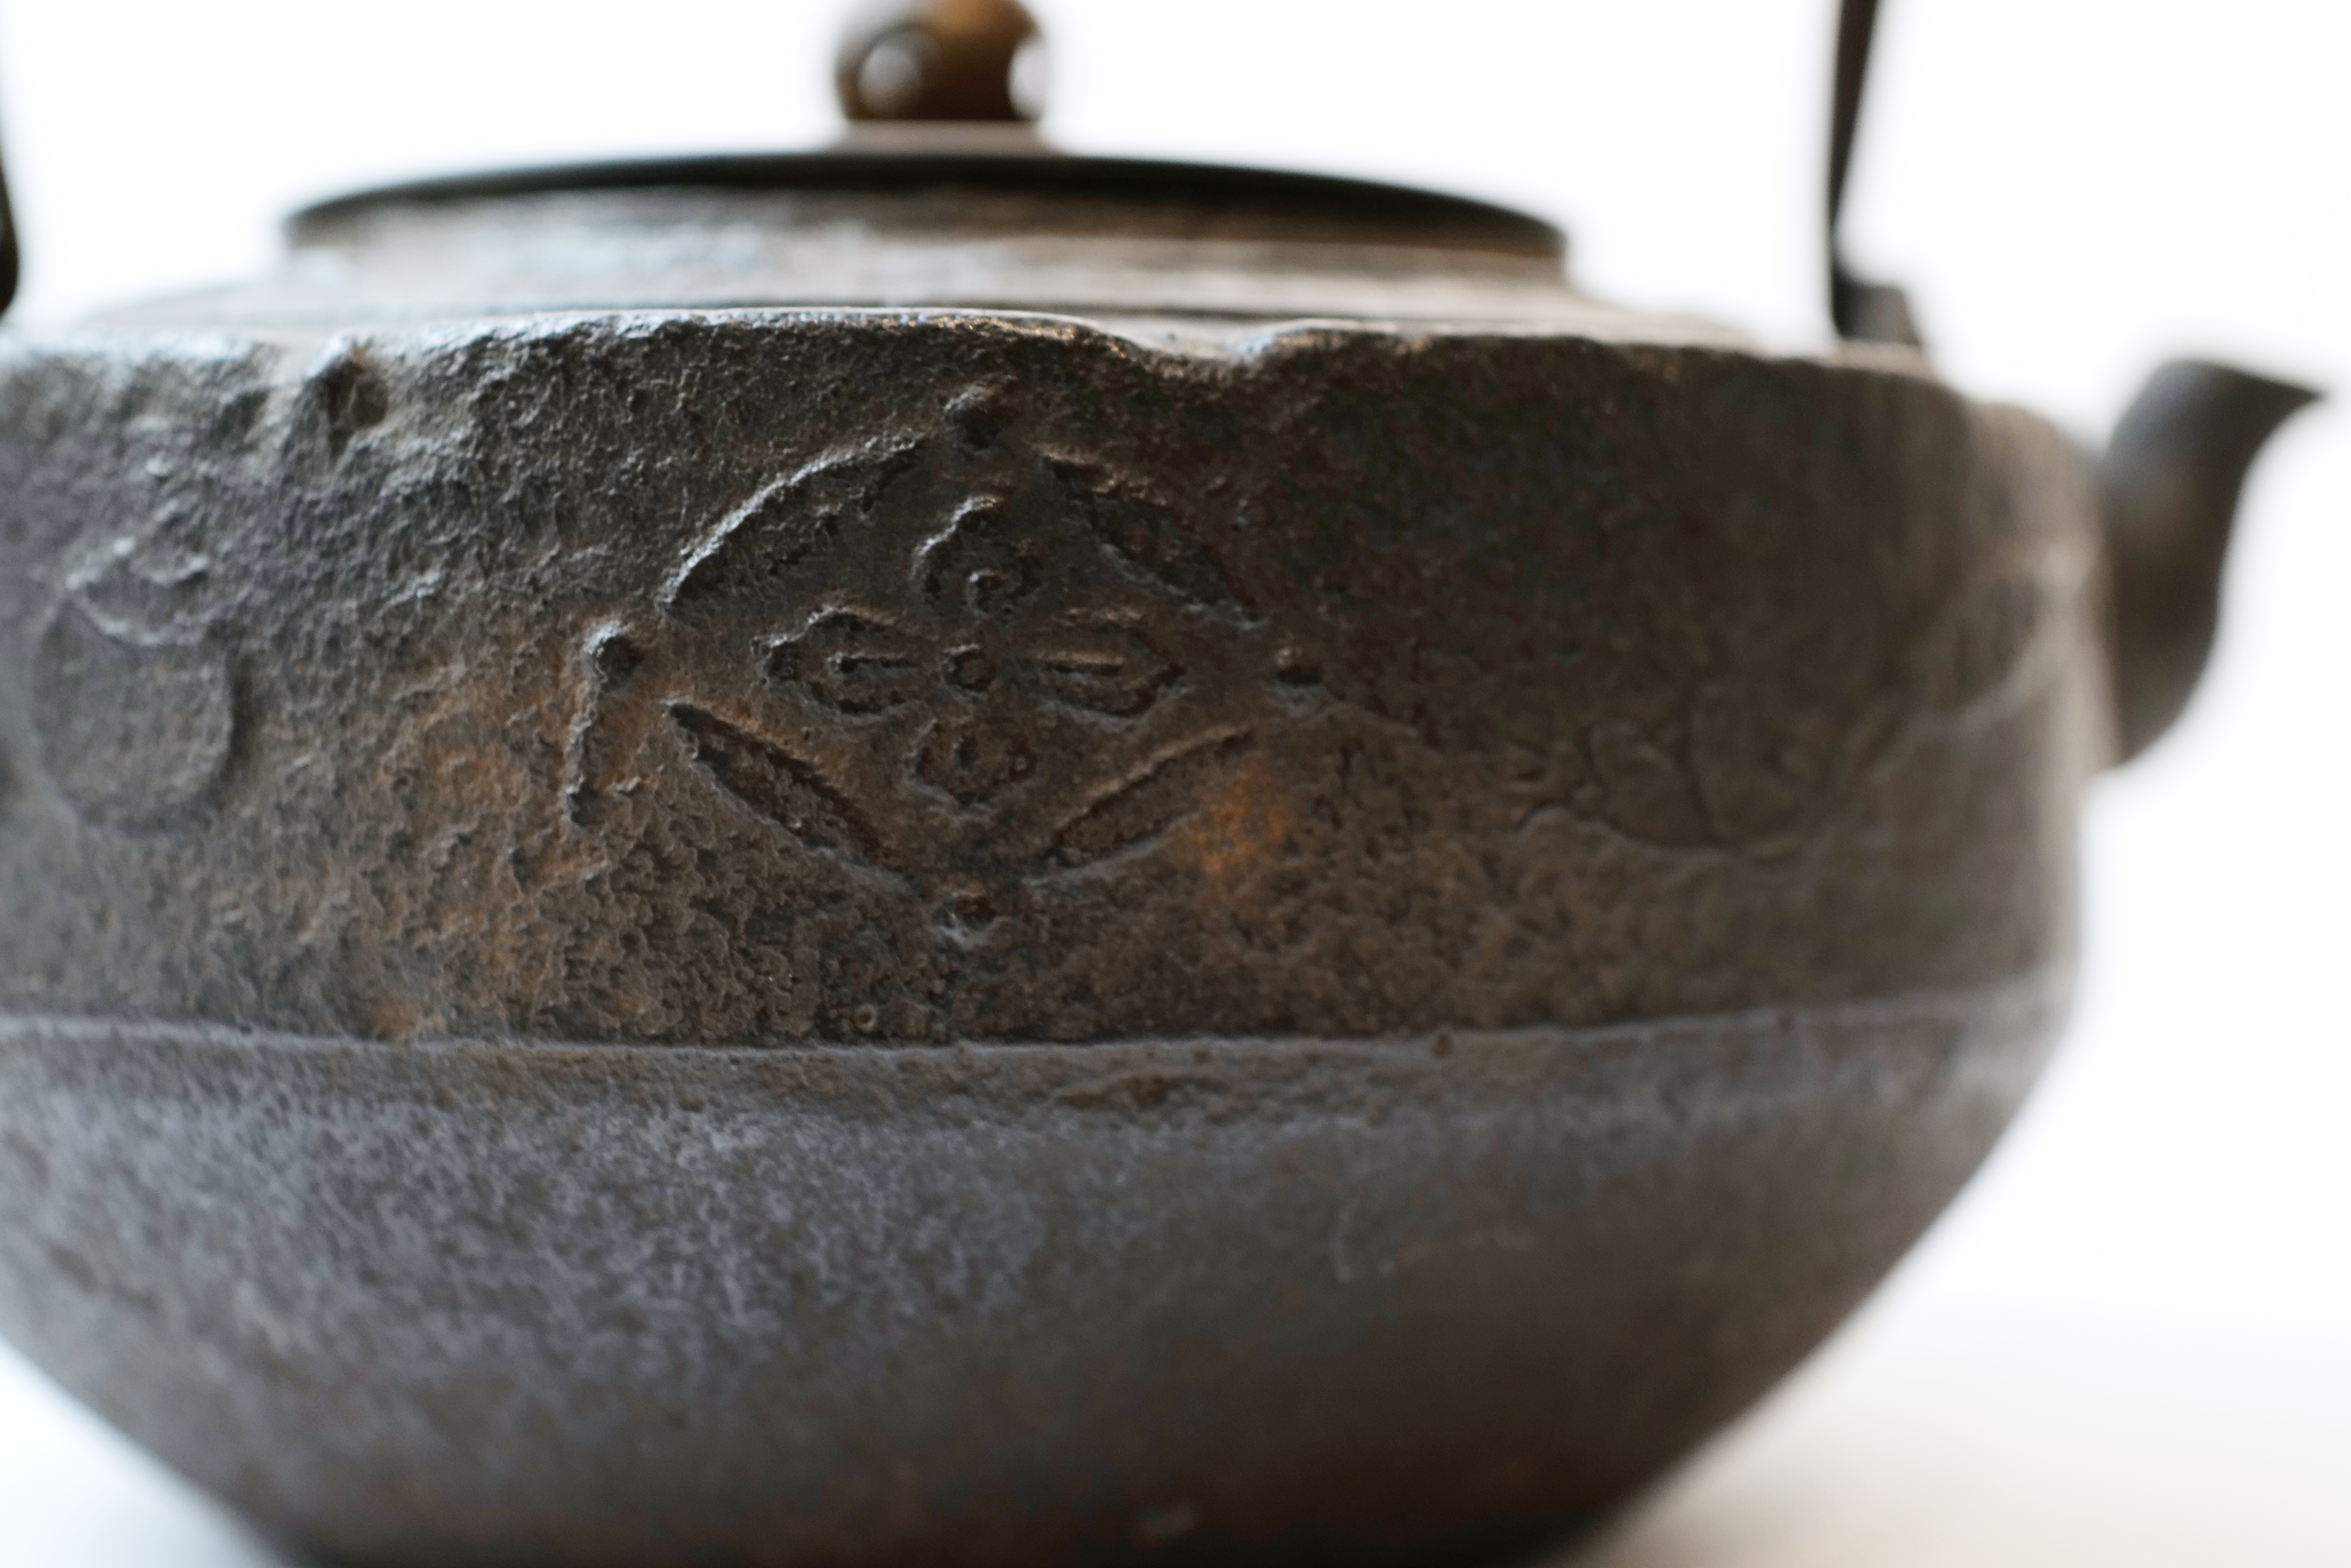 Iron Tea Kettle with Patterns of Treasures 【宝物纹铁壶】